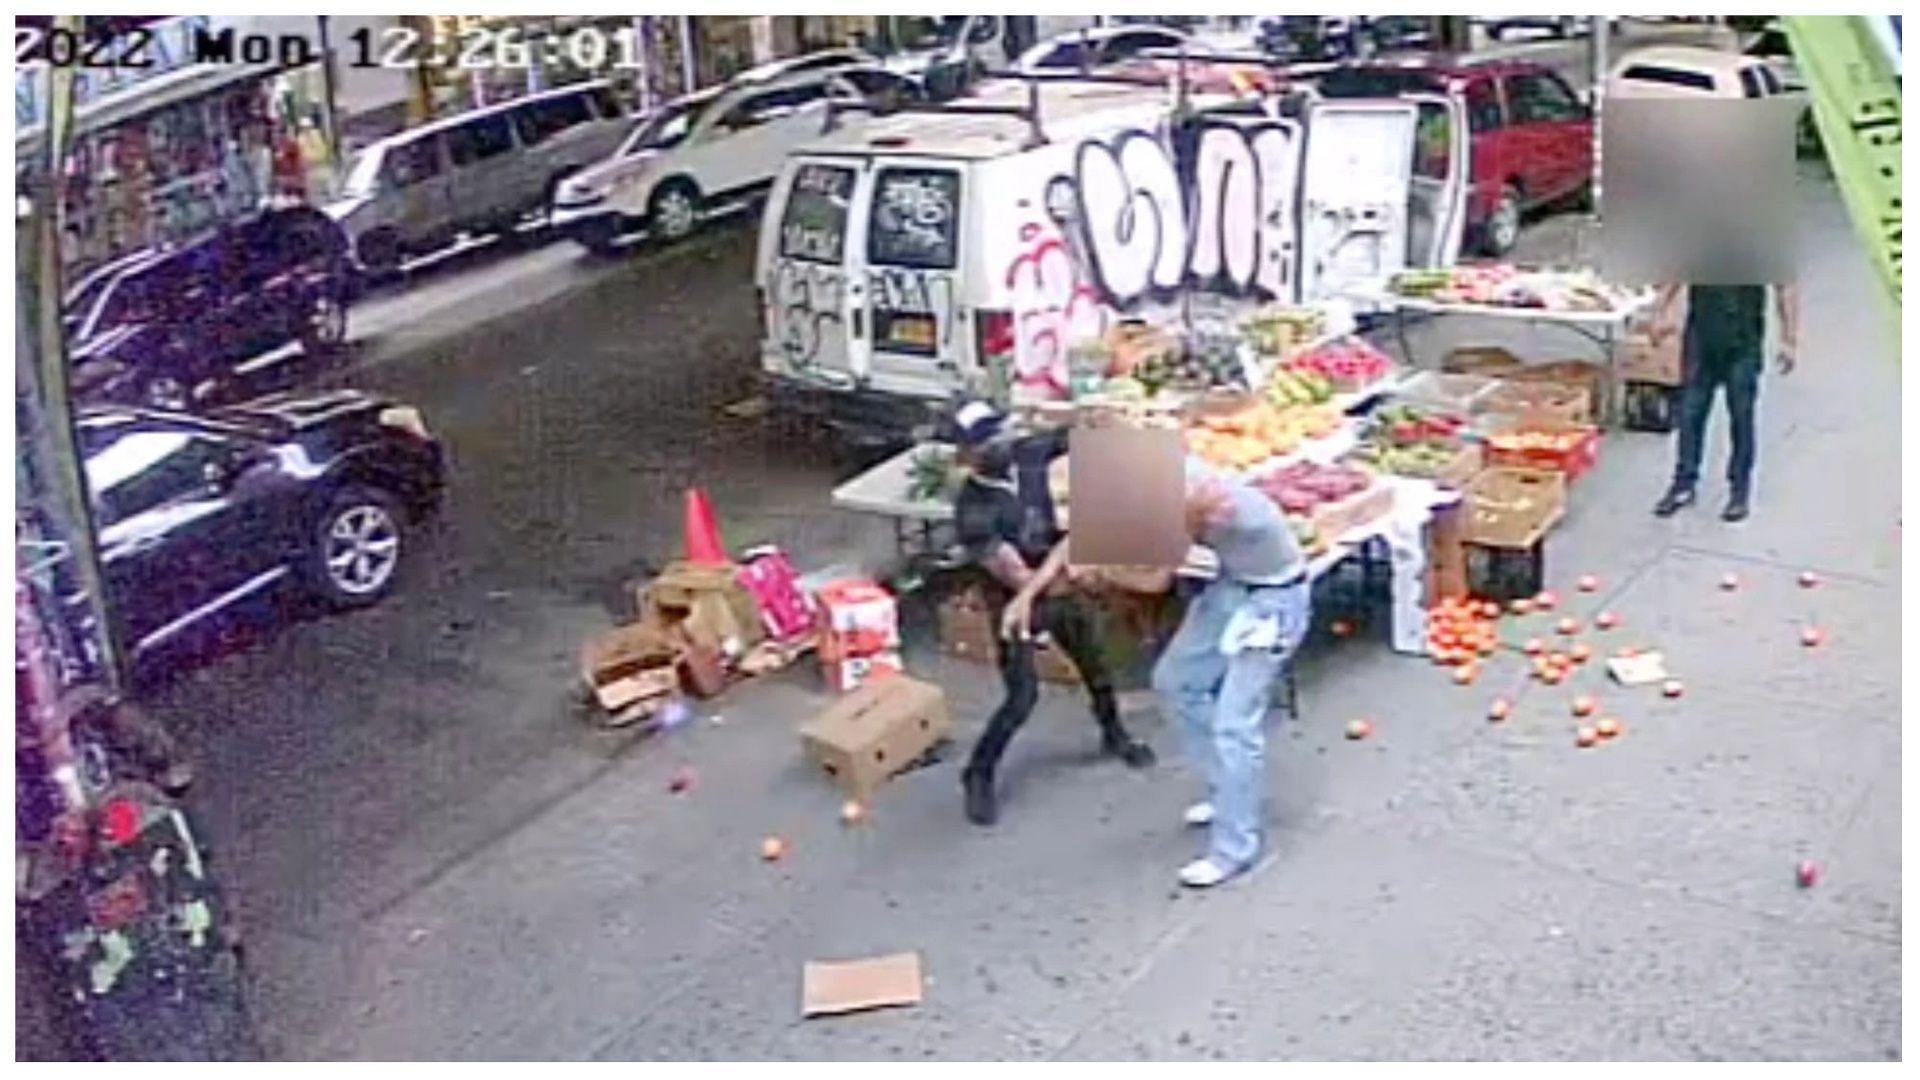 The accused is believed to be in the middle of (image via NYPD)